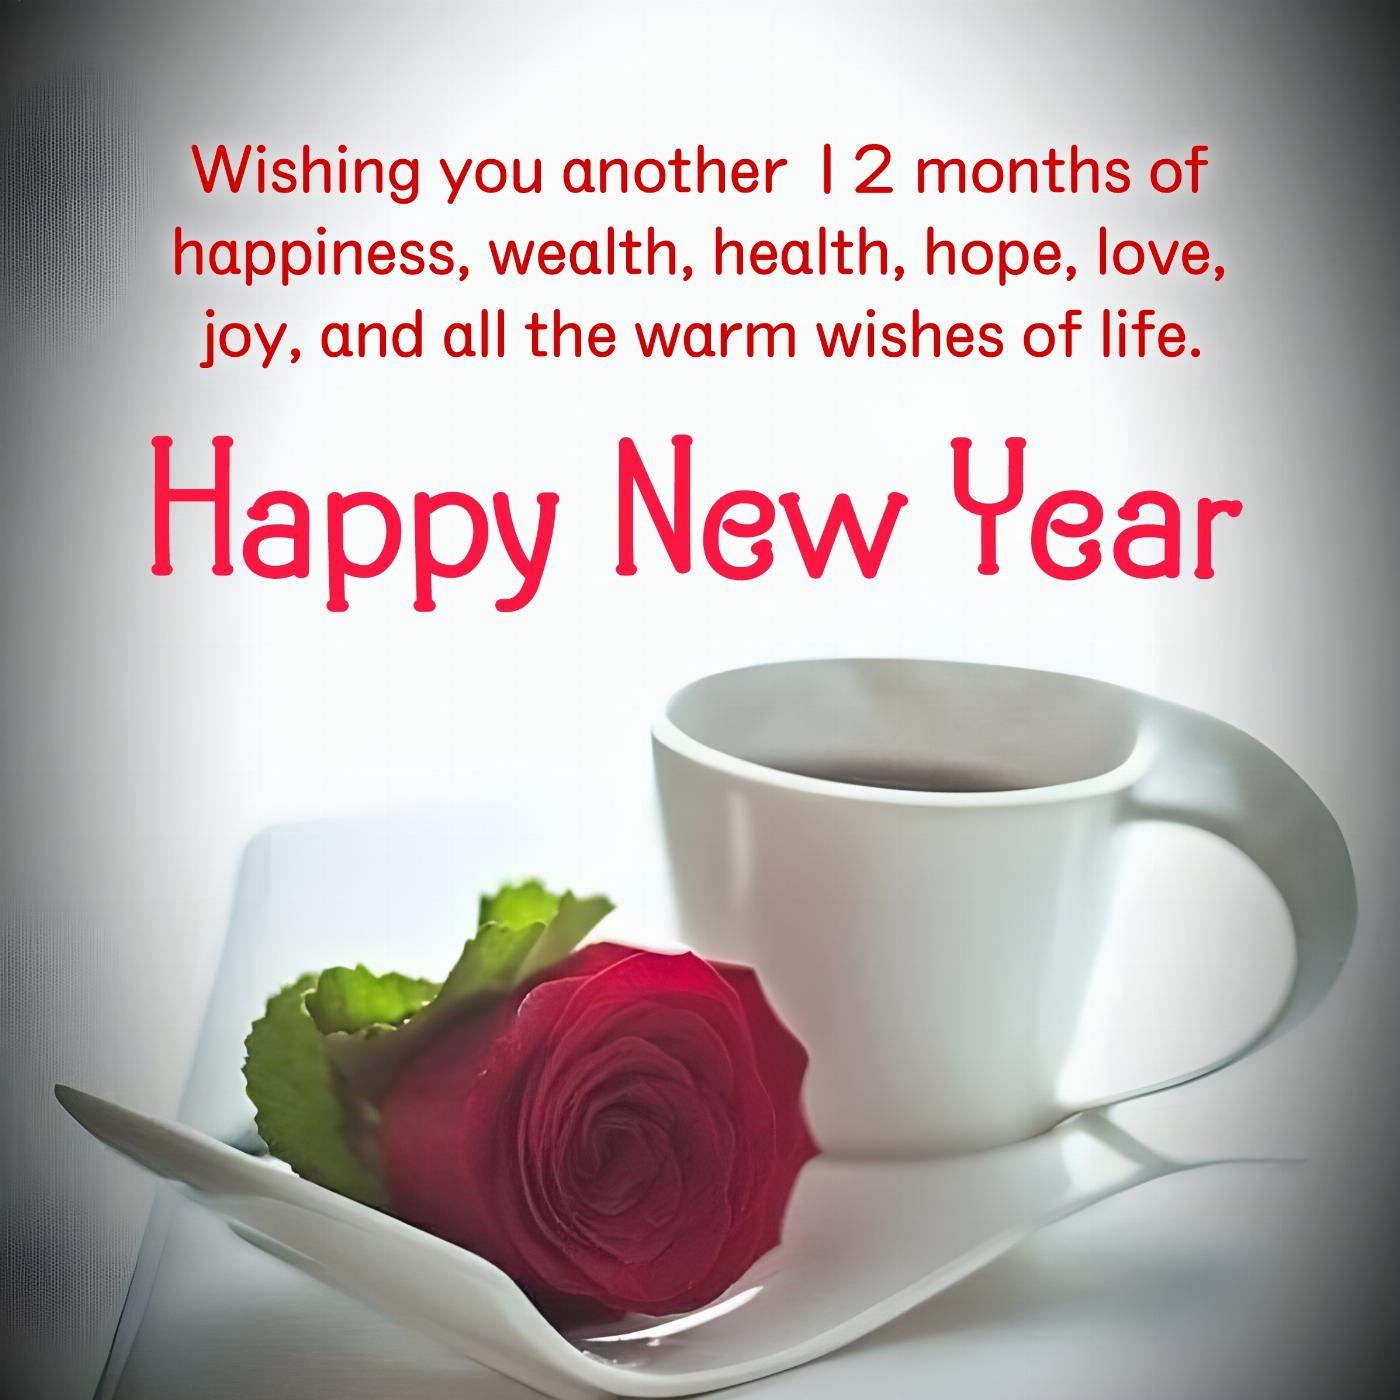 Wishing you another 12 months of happiness wealth health